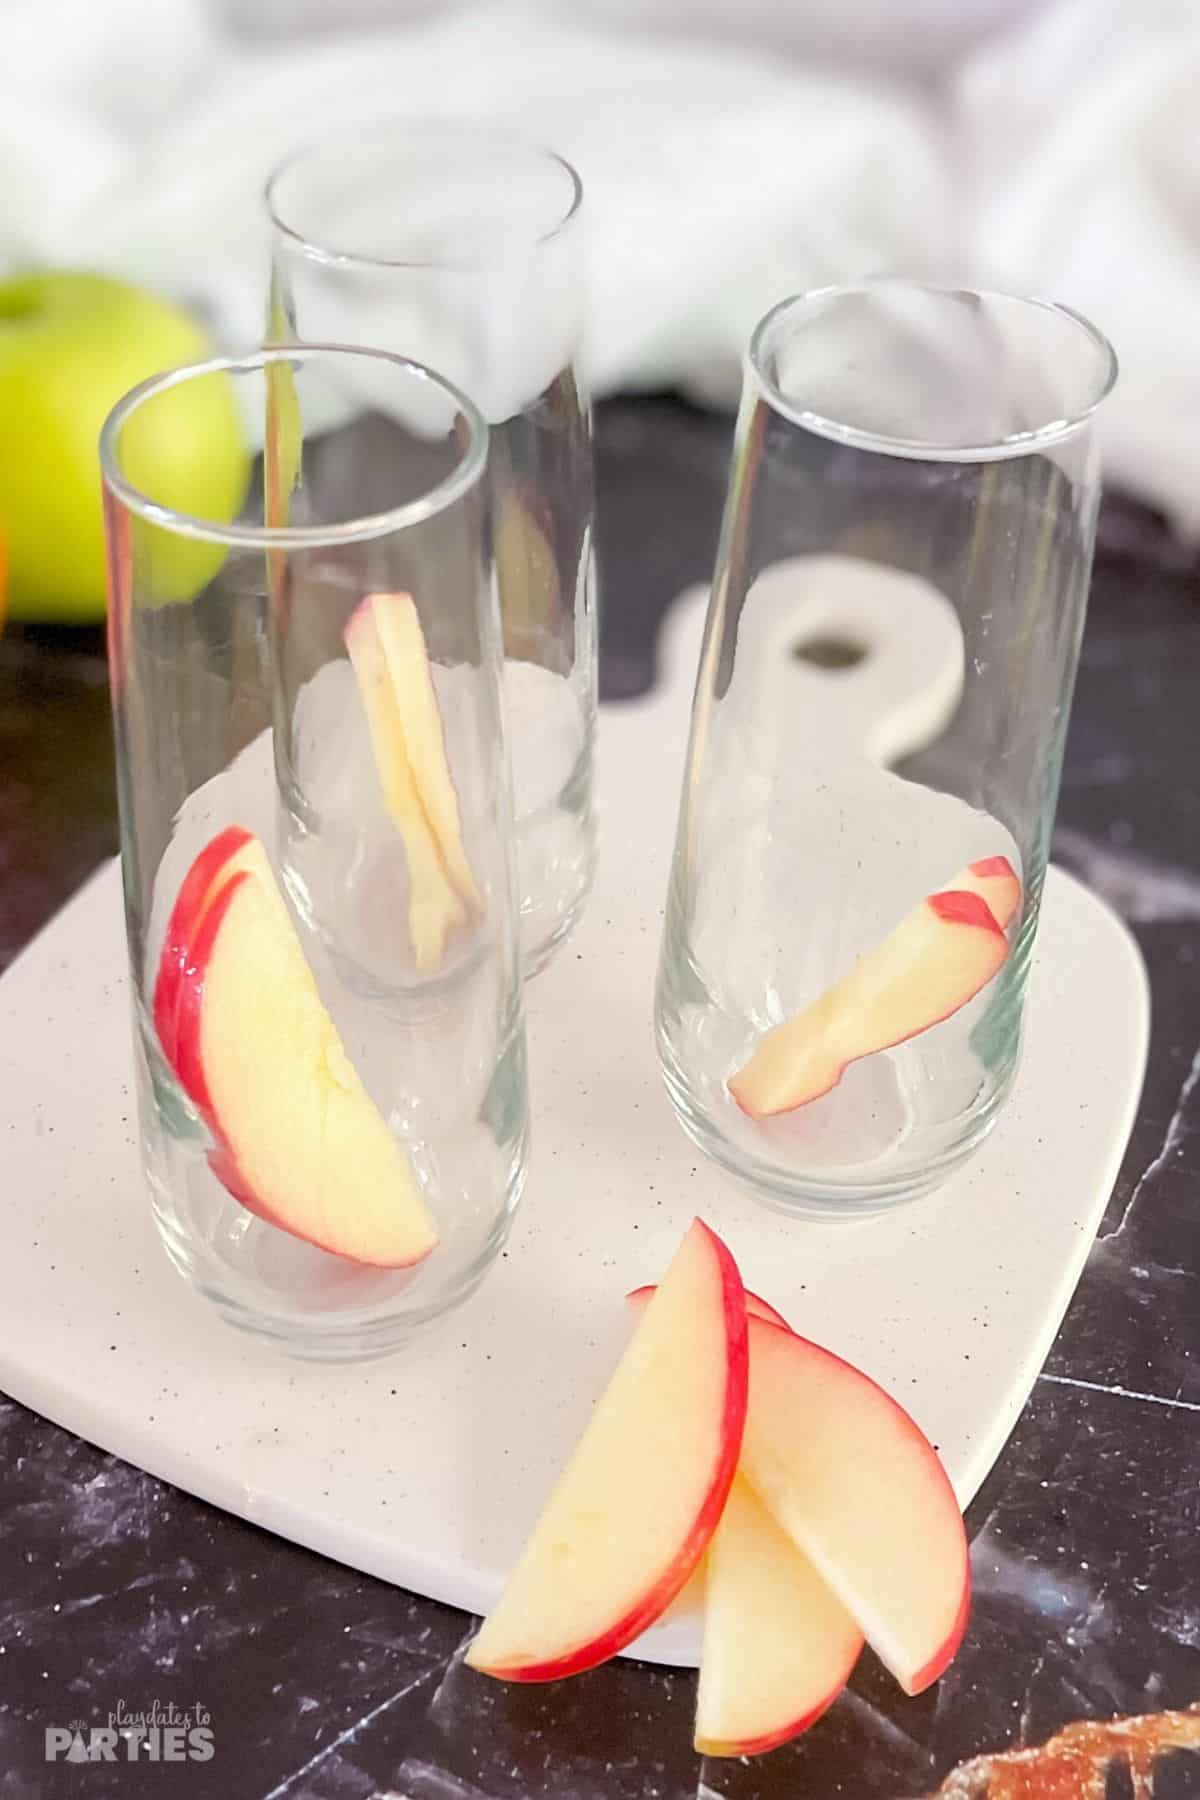 Apple slices in champagne flutes.